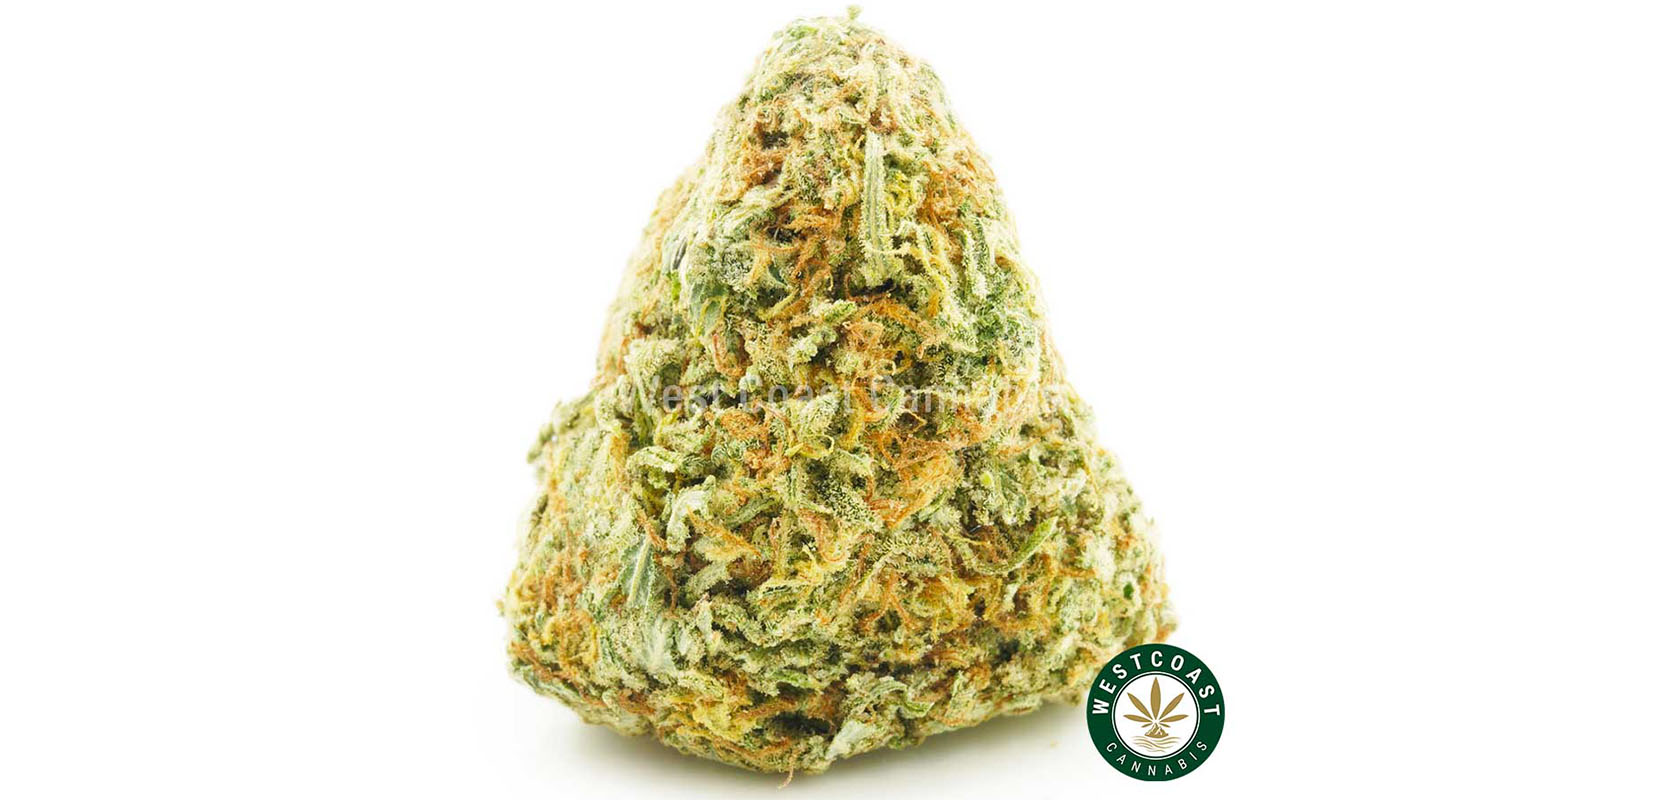 photo of gelato weed strain to buy weed online in canada west coast cannabis online dispensary